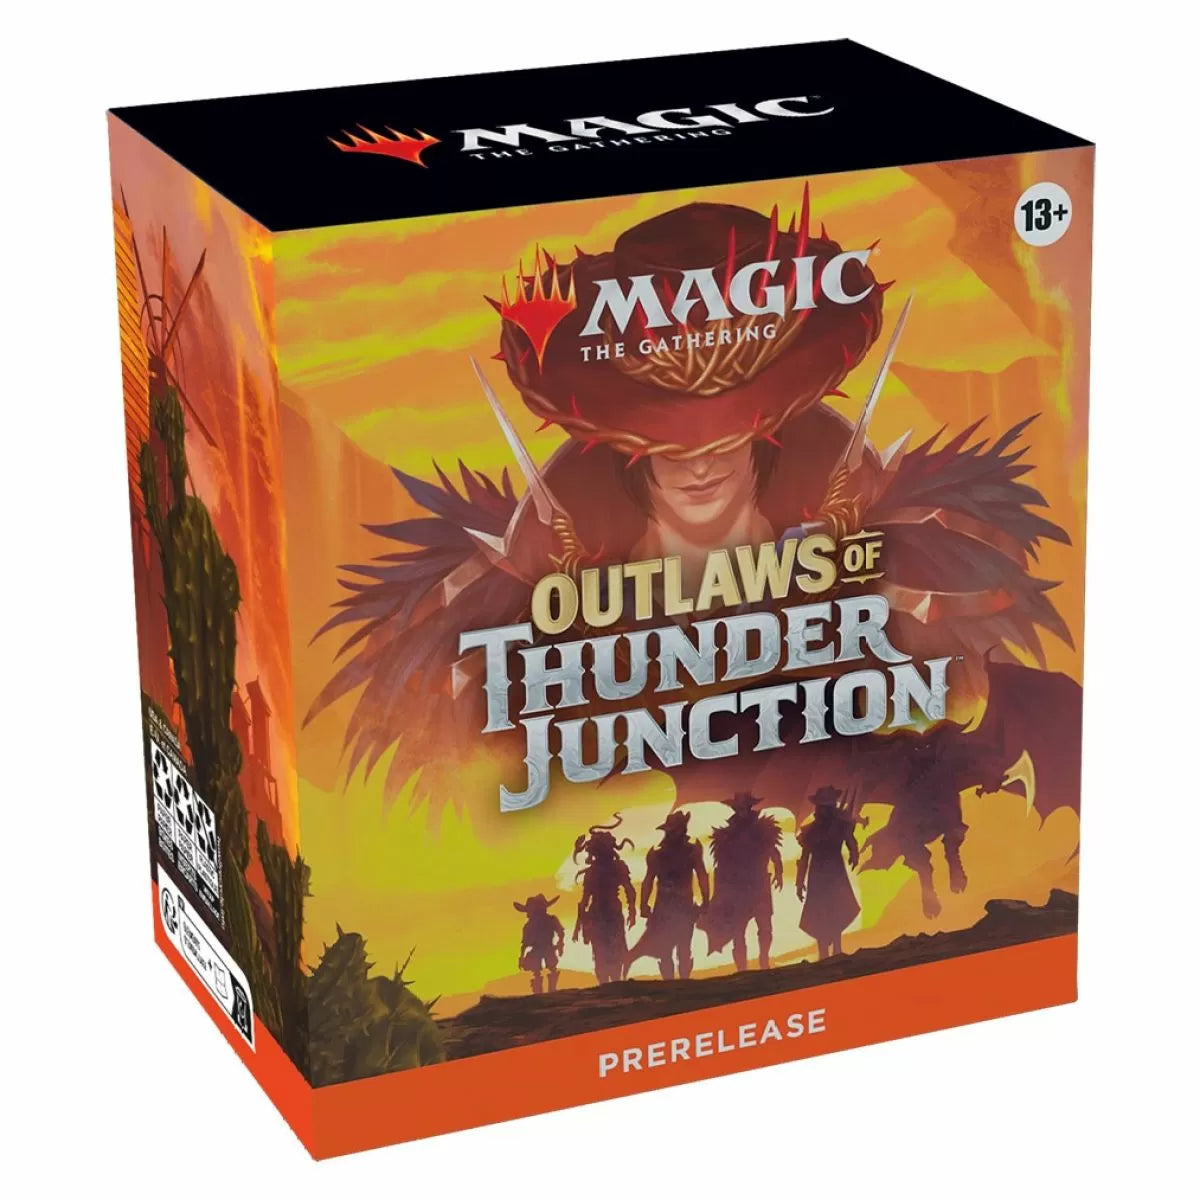 Outlaws of Thunder Junction Pre-release box